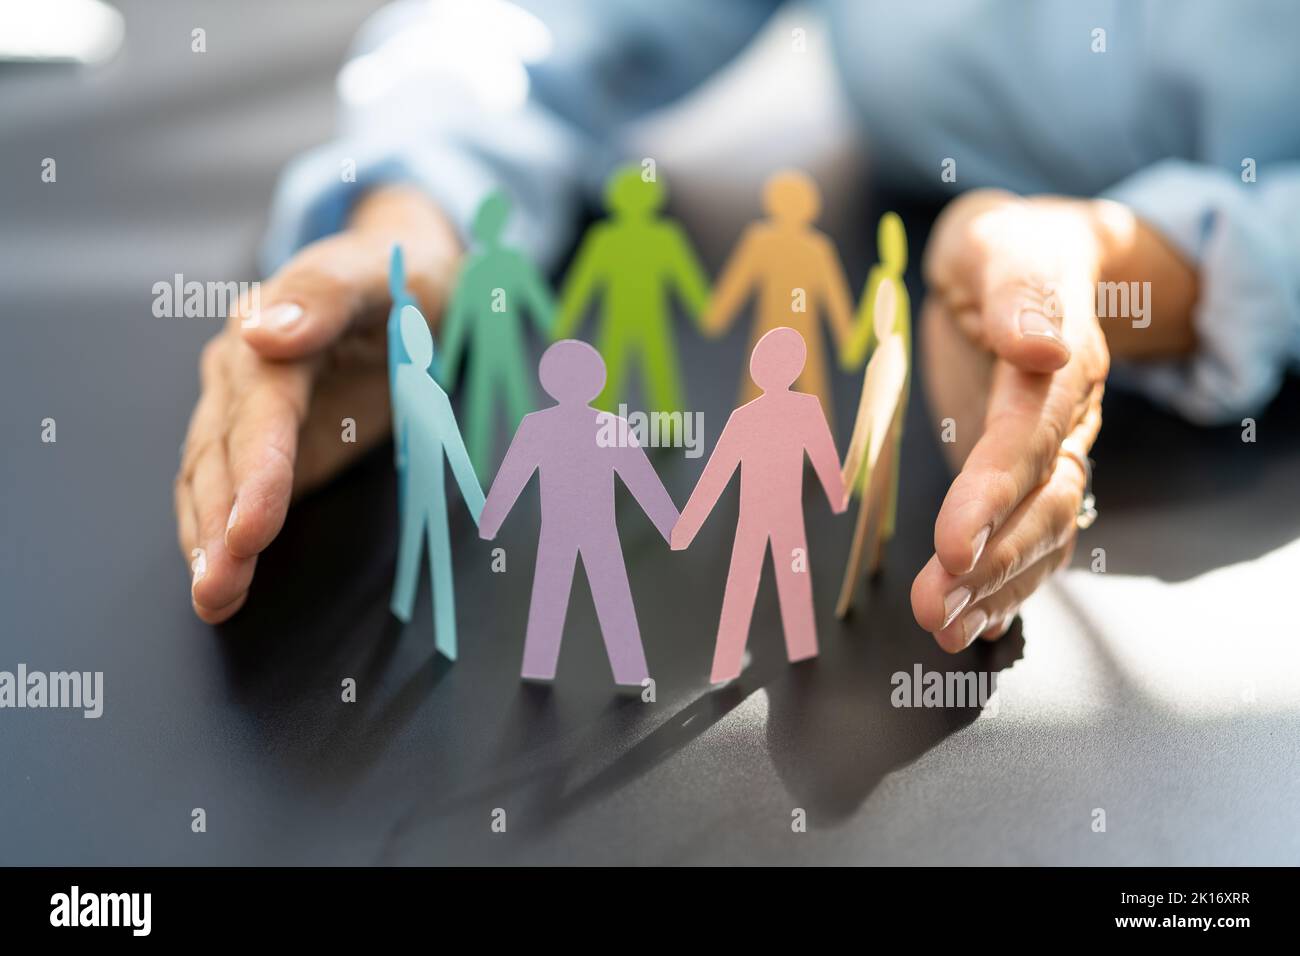 Diversity And Inclusion At Workplace. LGBT Leadership And Insurance Stock Photo